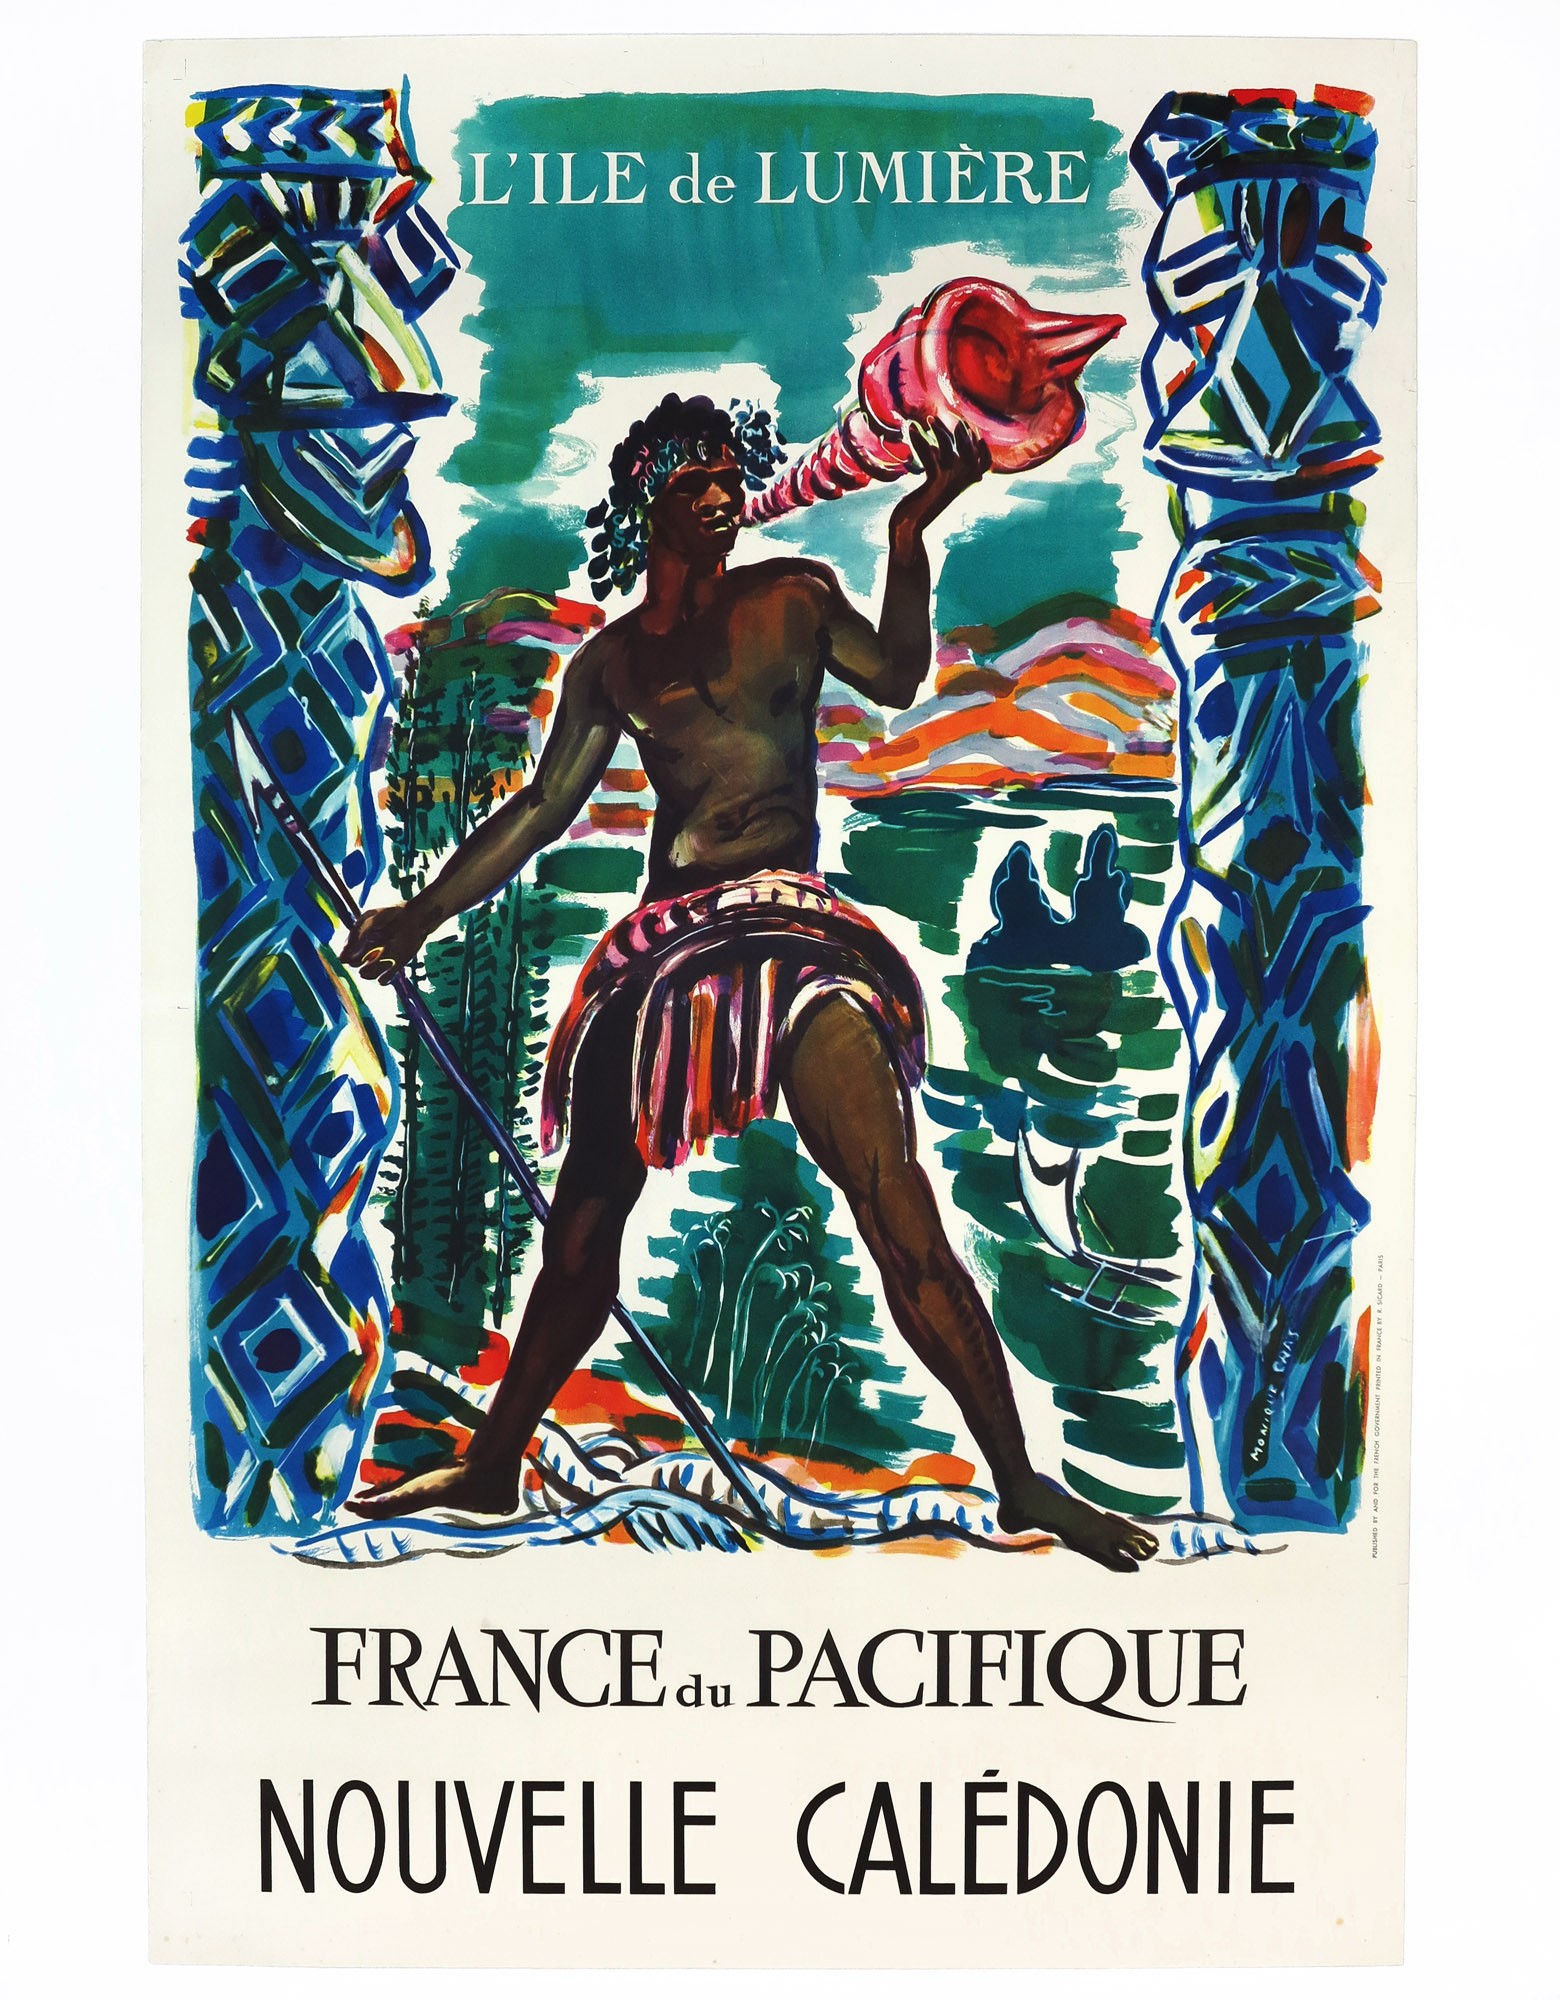 New Caledonia South Pacific Nouvelle Caledonie Travel Advertisement Poster 